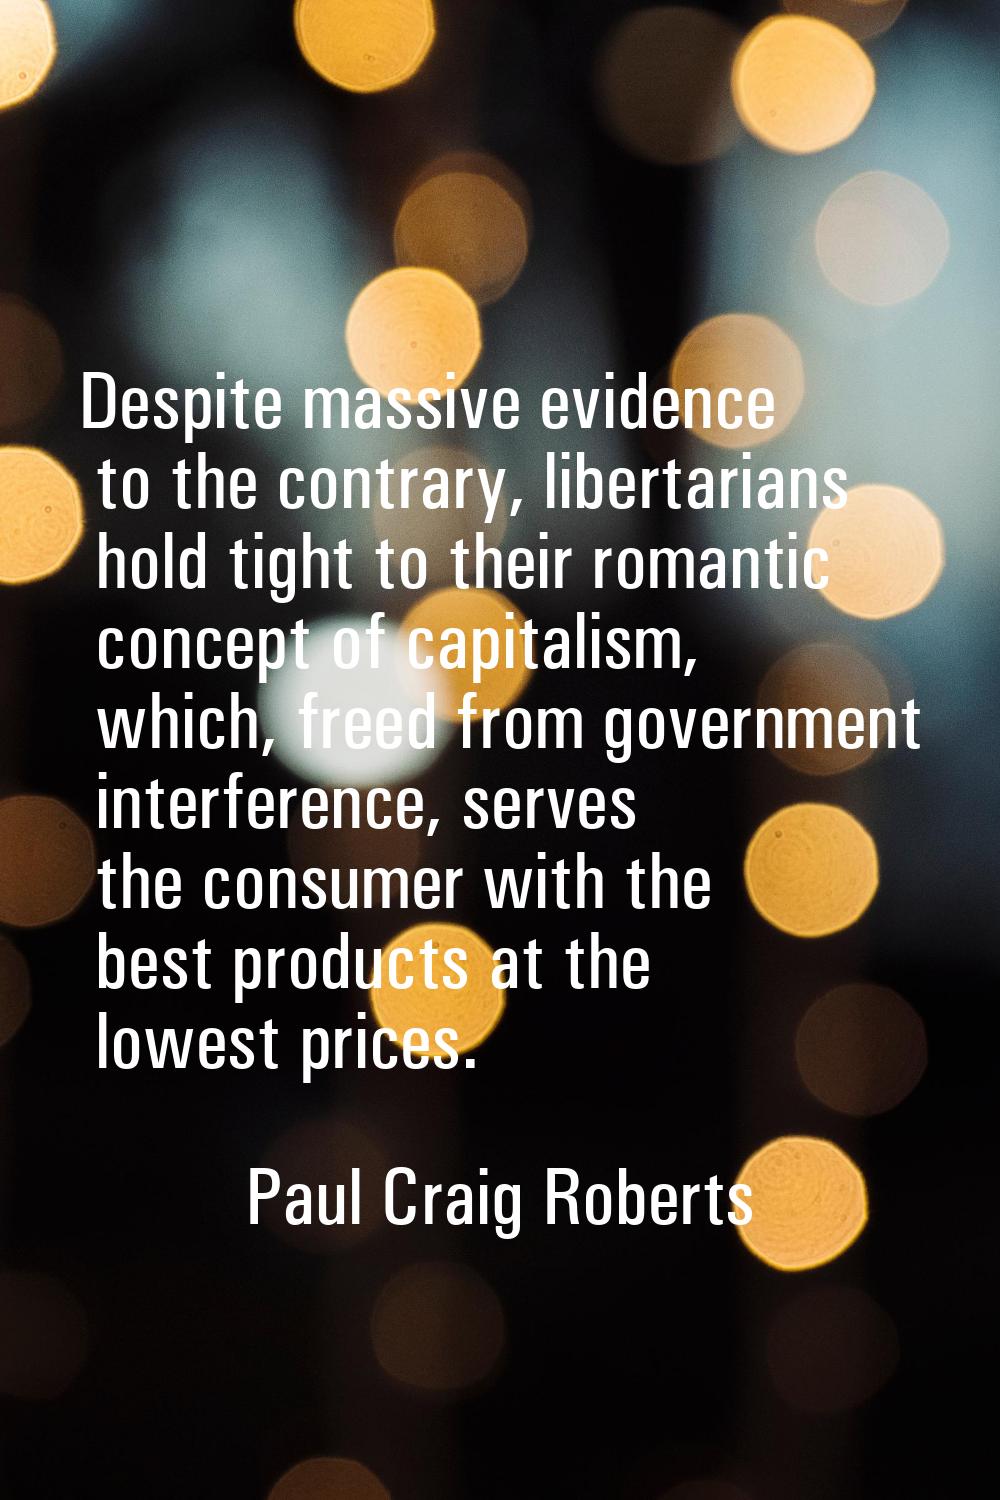 Despite massive evidence to the contrary, libertarians hold tight to their romantic concept of capi